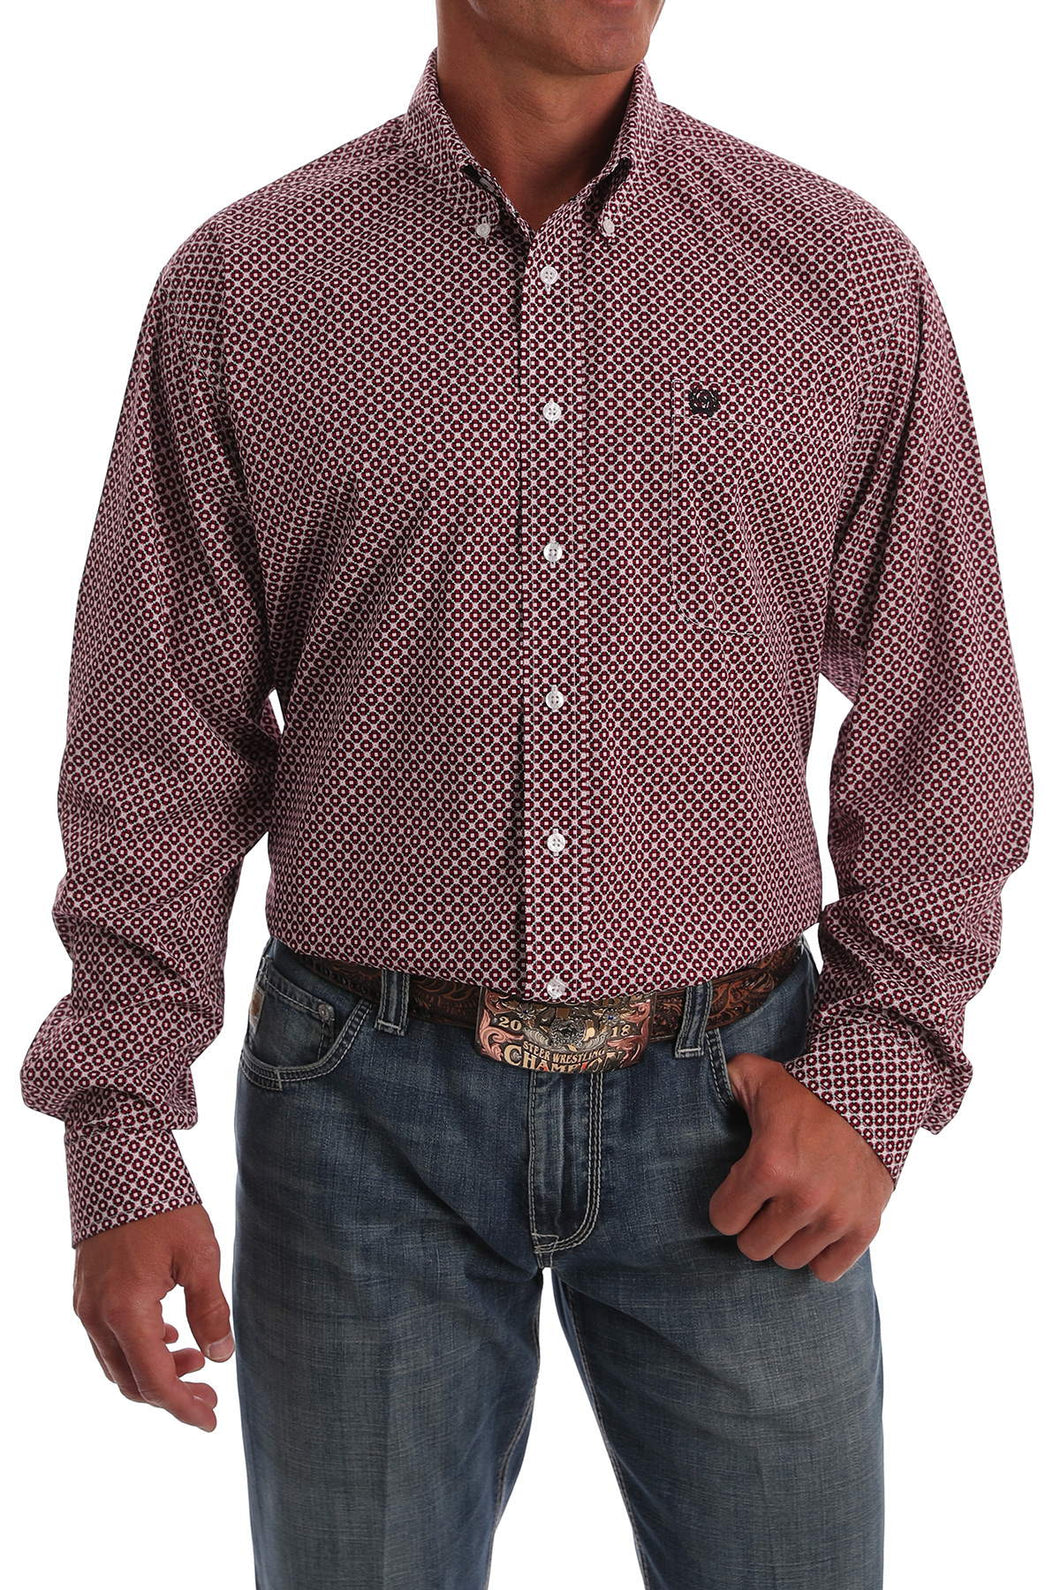 MEN'S RED, WHITE AND BLACK GEOMETRIC PRINT BUTTON-DOWN WESTERN SHIRT